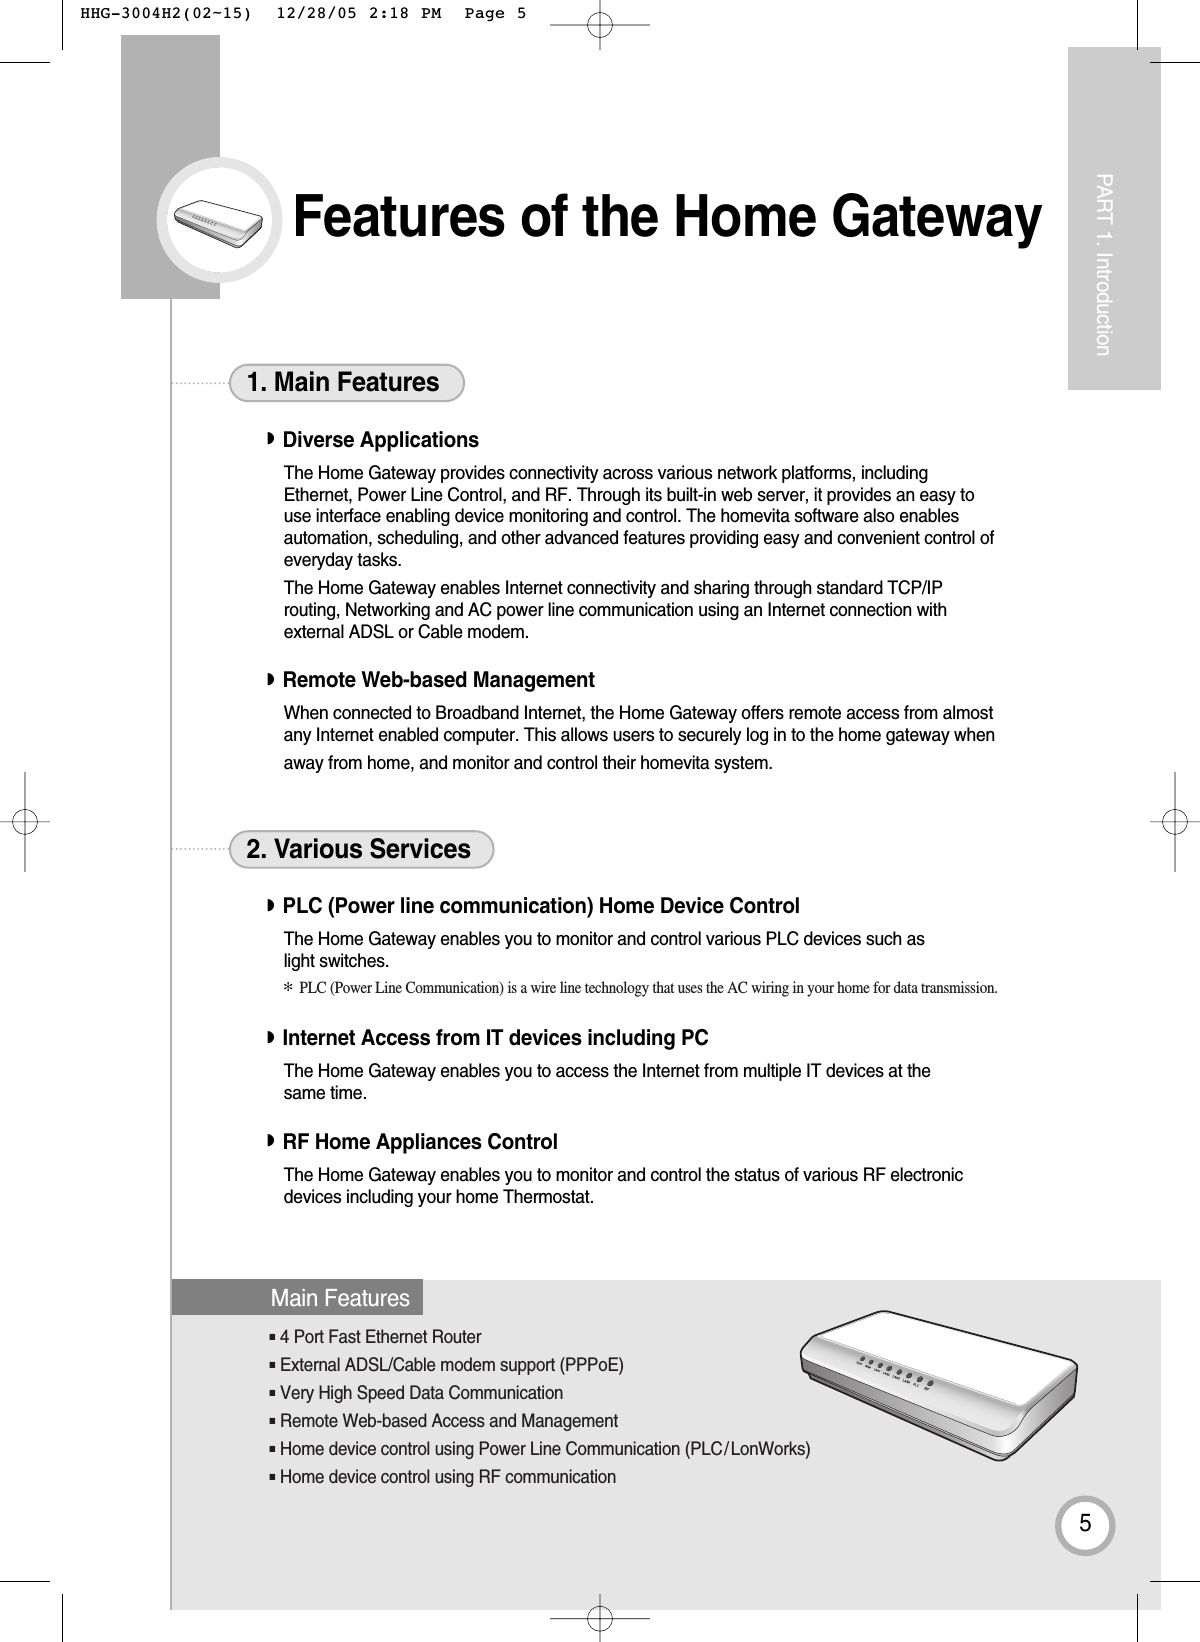 ■4 Port Fast Ethernet Router■External ADSL/Cable modem support (PPPoE)■Very High Speed Data Communication■Remote Web-based Access and Management■Home device control using Power Line Communication (PLC/LonWorks)■Home device control using RF communicationFeatures of the Home Gateway5PART 1. Introduction◗Diverse ApplicationsThe Home Gateway provides connectivity across various network platforms, including Ethernet, Power Line Control, and RF. Through its built-in web server, it provides an easy touse interface enabling device monitoring and control. The homevita software also enablesautomation, scheduling, and other advanced features providing easy and convenient control ofeveryday tasks.The Home Gateway enables Internet connectivity and sharing through standard TCP/IProuting, Networking and AC power line communication using an Internet connection withexternal ADSL or Cable modem.◗Remote Web-based Management When connected to Broadband Internet, the Home Gateway offers remote access from almostany Internet enabled computer. This allows users to securely log in to the home gateway whenaway from home, and monitor and control their homevita system.1. Main Features◗PLC (Power line communication) Home Device ControlThe Home Gateway enables you to monitor and control various PLC devices such as light switches.◗Internet Access from IT devices including PCThe Home Gateway enables you to access the Internet from multiple IT devices at thesame time.◗RF Home Appliances ControlThe Home Gateway enables you to monitor and control the status of various RF electronicdevices including your home Thermostat.2. Various ServicesMain Features✻PLC (Power Line Communication) is a wire line technology that uses the AC wiring in your home for data transmission. HHG-3004H2(02~15)  12/28/05 2:18 PM  Page 5